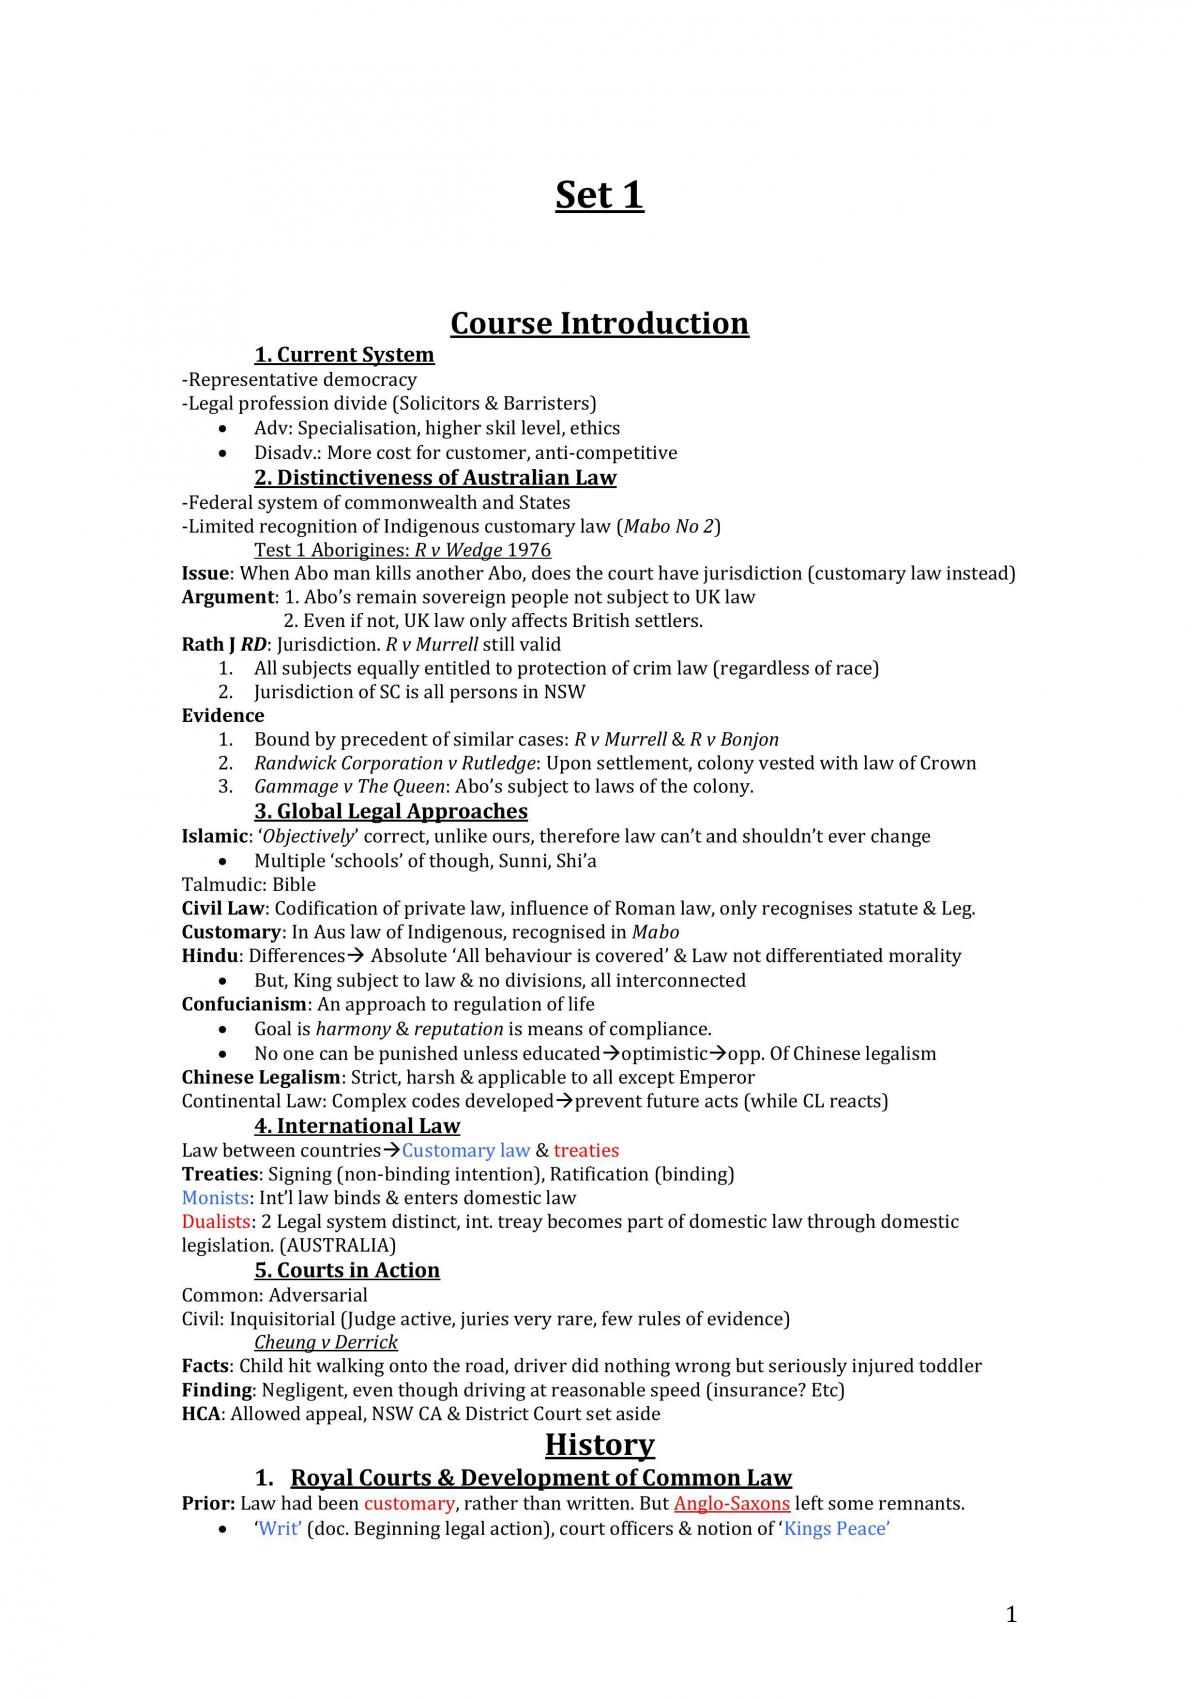 Introducing Law and Justice Notes - Page 1